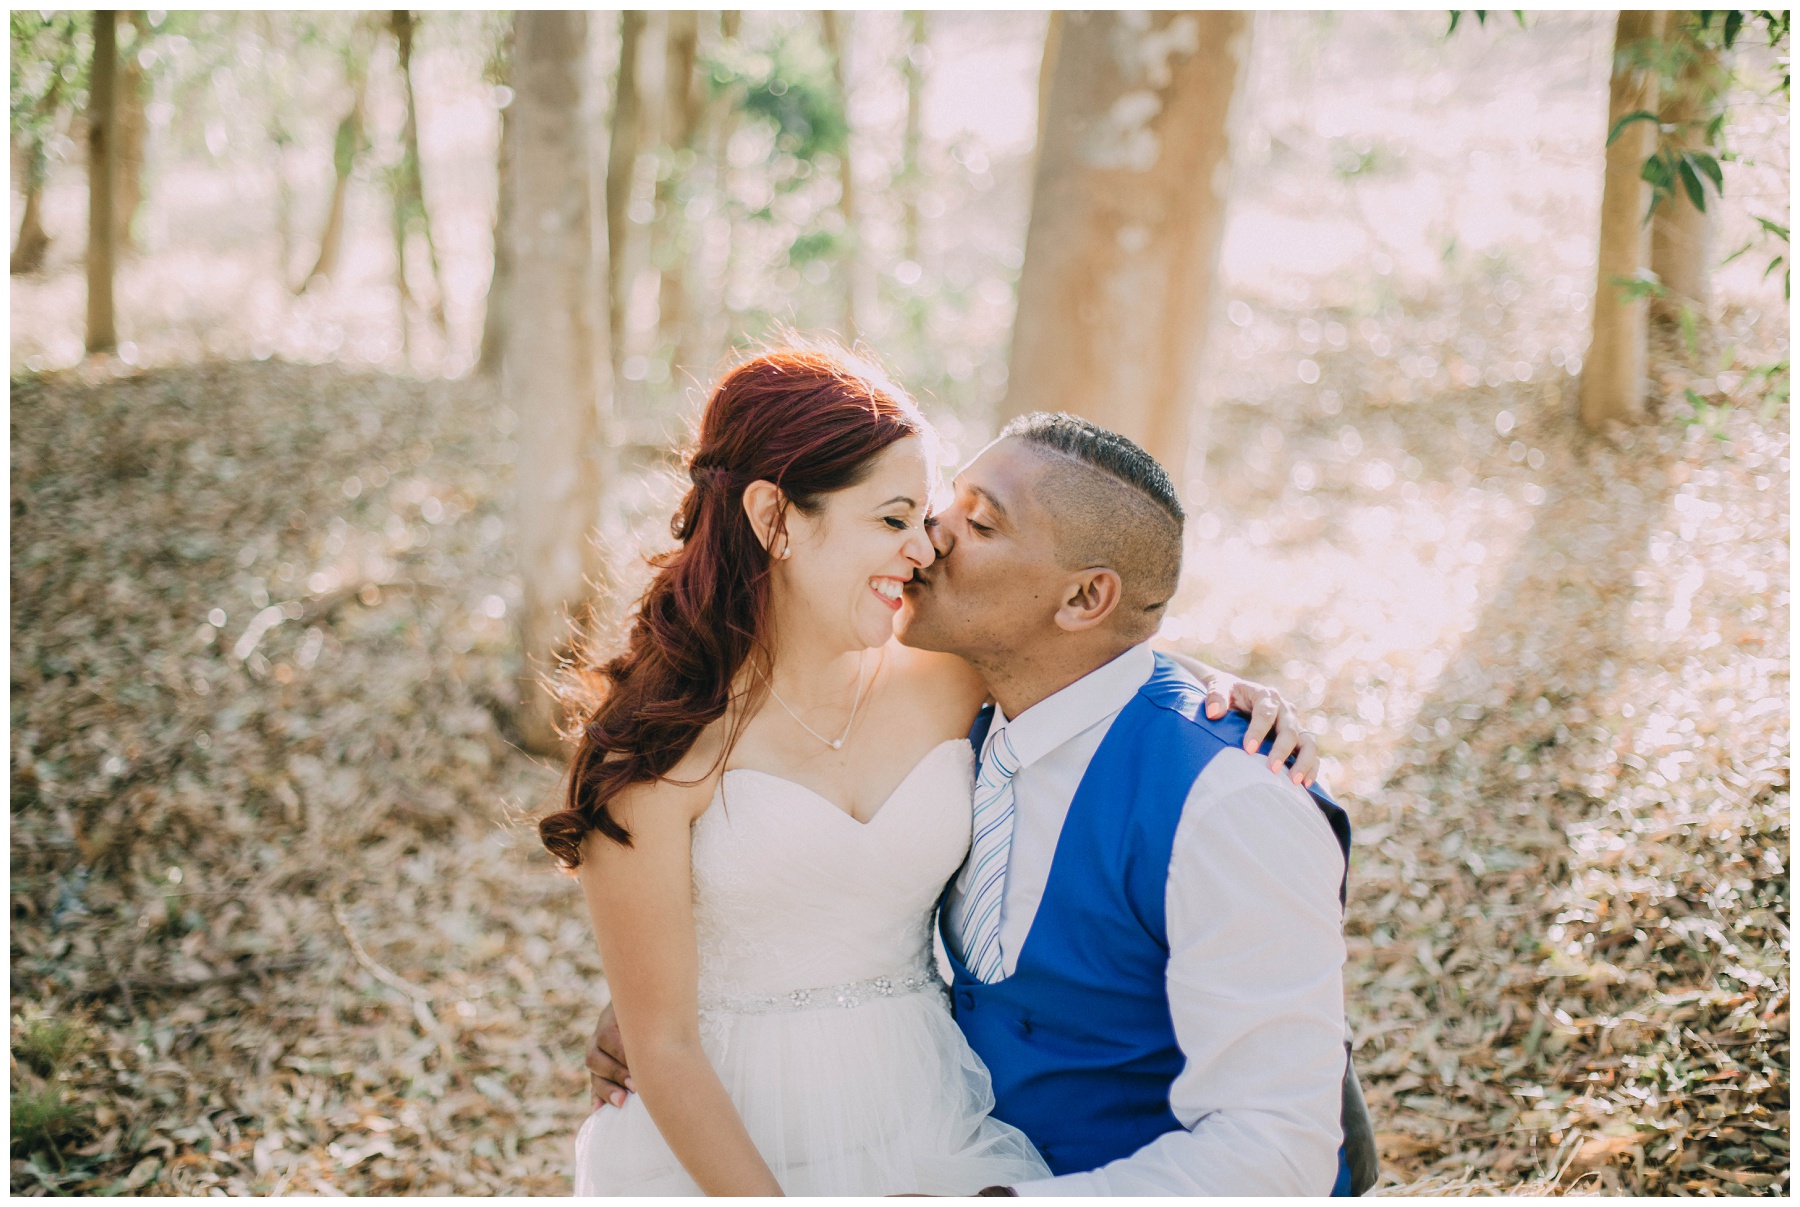 Ronel Kruger Cape Town Wedding and Lifestyle Photographer_1341.jpg